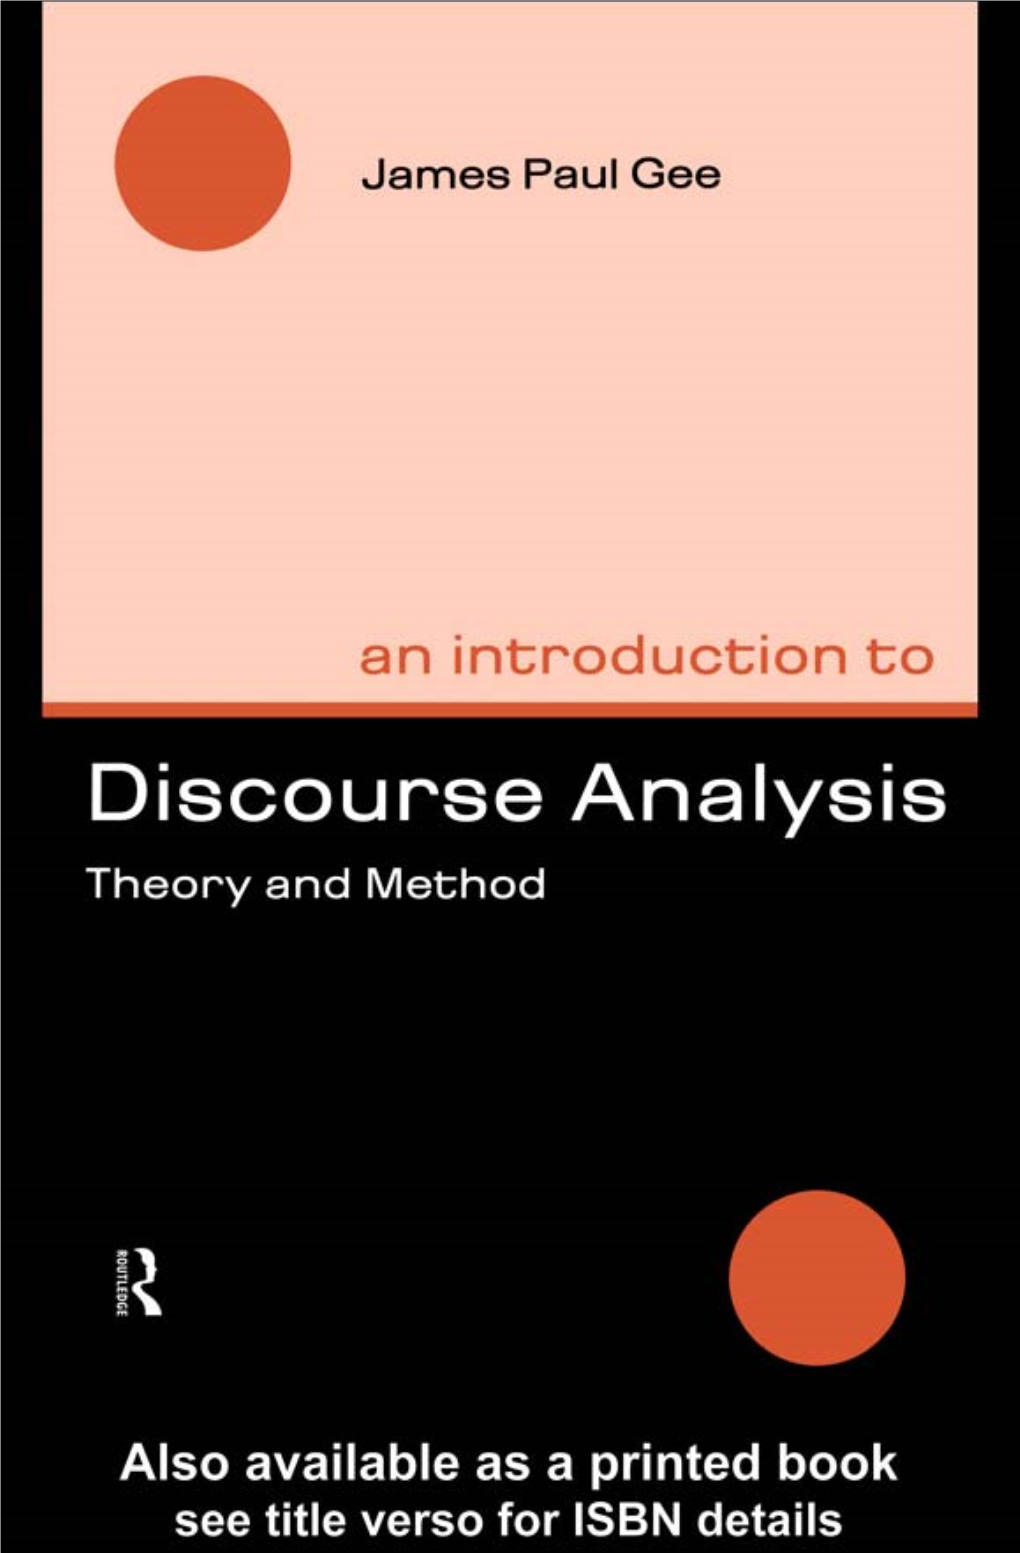 An Introduction to Discourse Analysis: Theory and Method/James Paul Gee